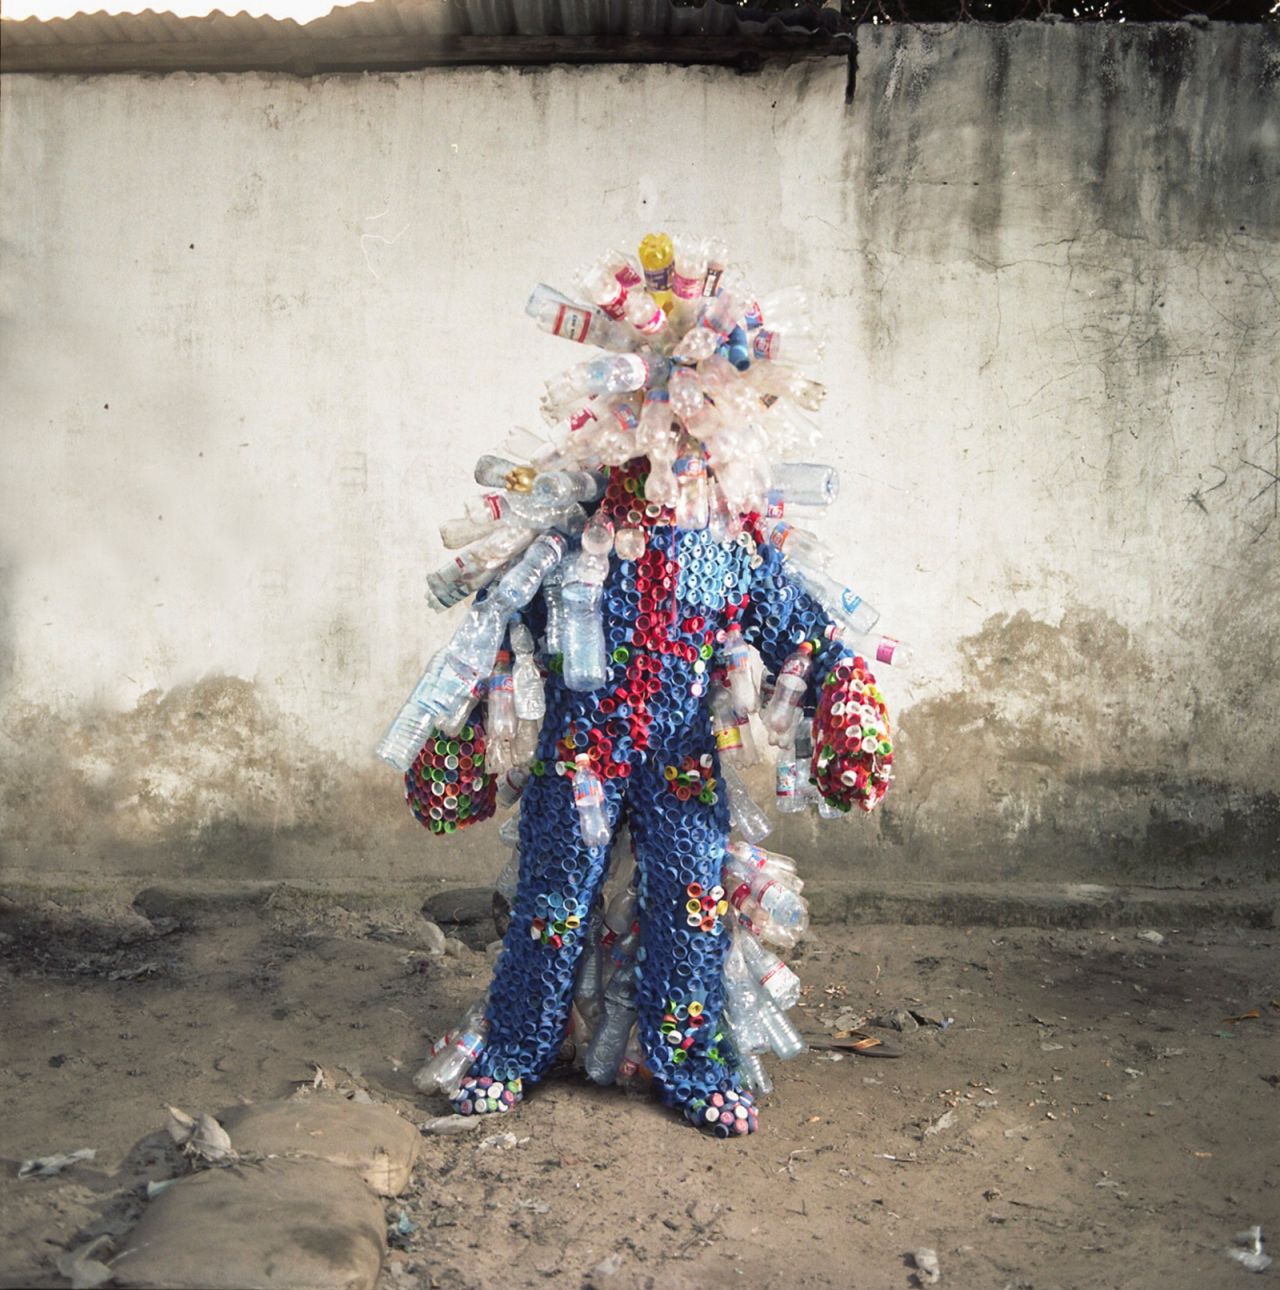 Congolese artist Junior Mungongu posing in his lid costume in Selembao district, Kinshasa,. He condemns the obvious political inaction in a city of 13 million inhabitants where single-use plastic is king. He tries to educate his audience by asking kids to screw their plastic bottles on his lid costume.